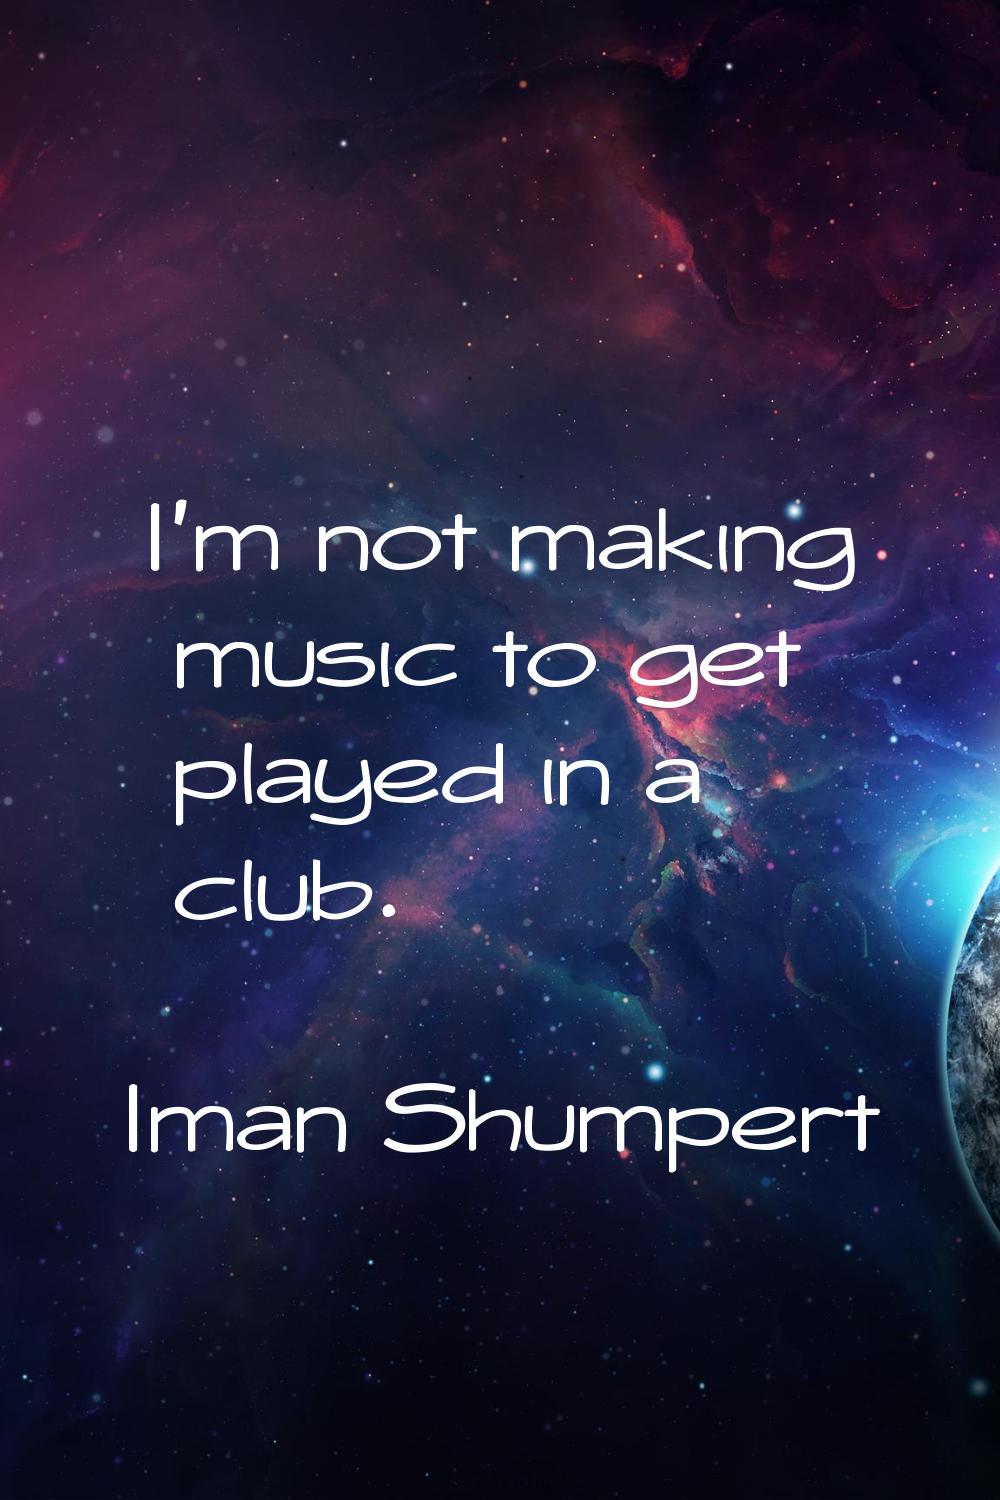 I'm not making music to get played in a club.